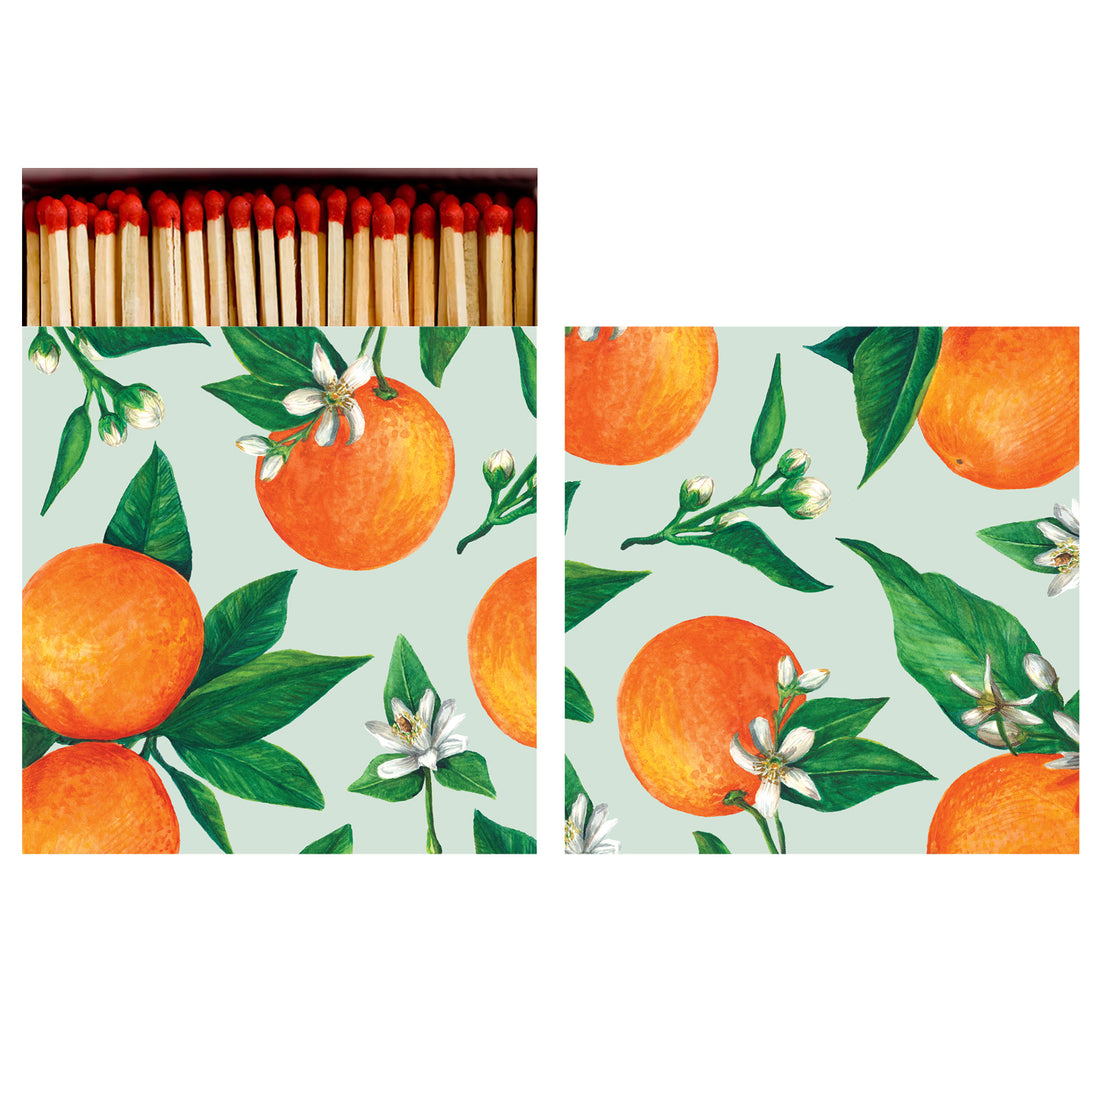 Two sides of a square match box, the left of which is open slightly to reveal the matches inside. The artwork on the box depicts vibrant oranges with deep green leaves and white blossoms scattered over a seafoam background.